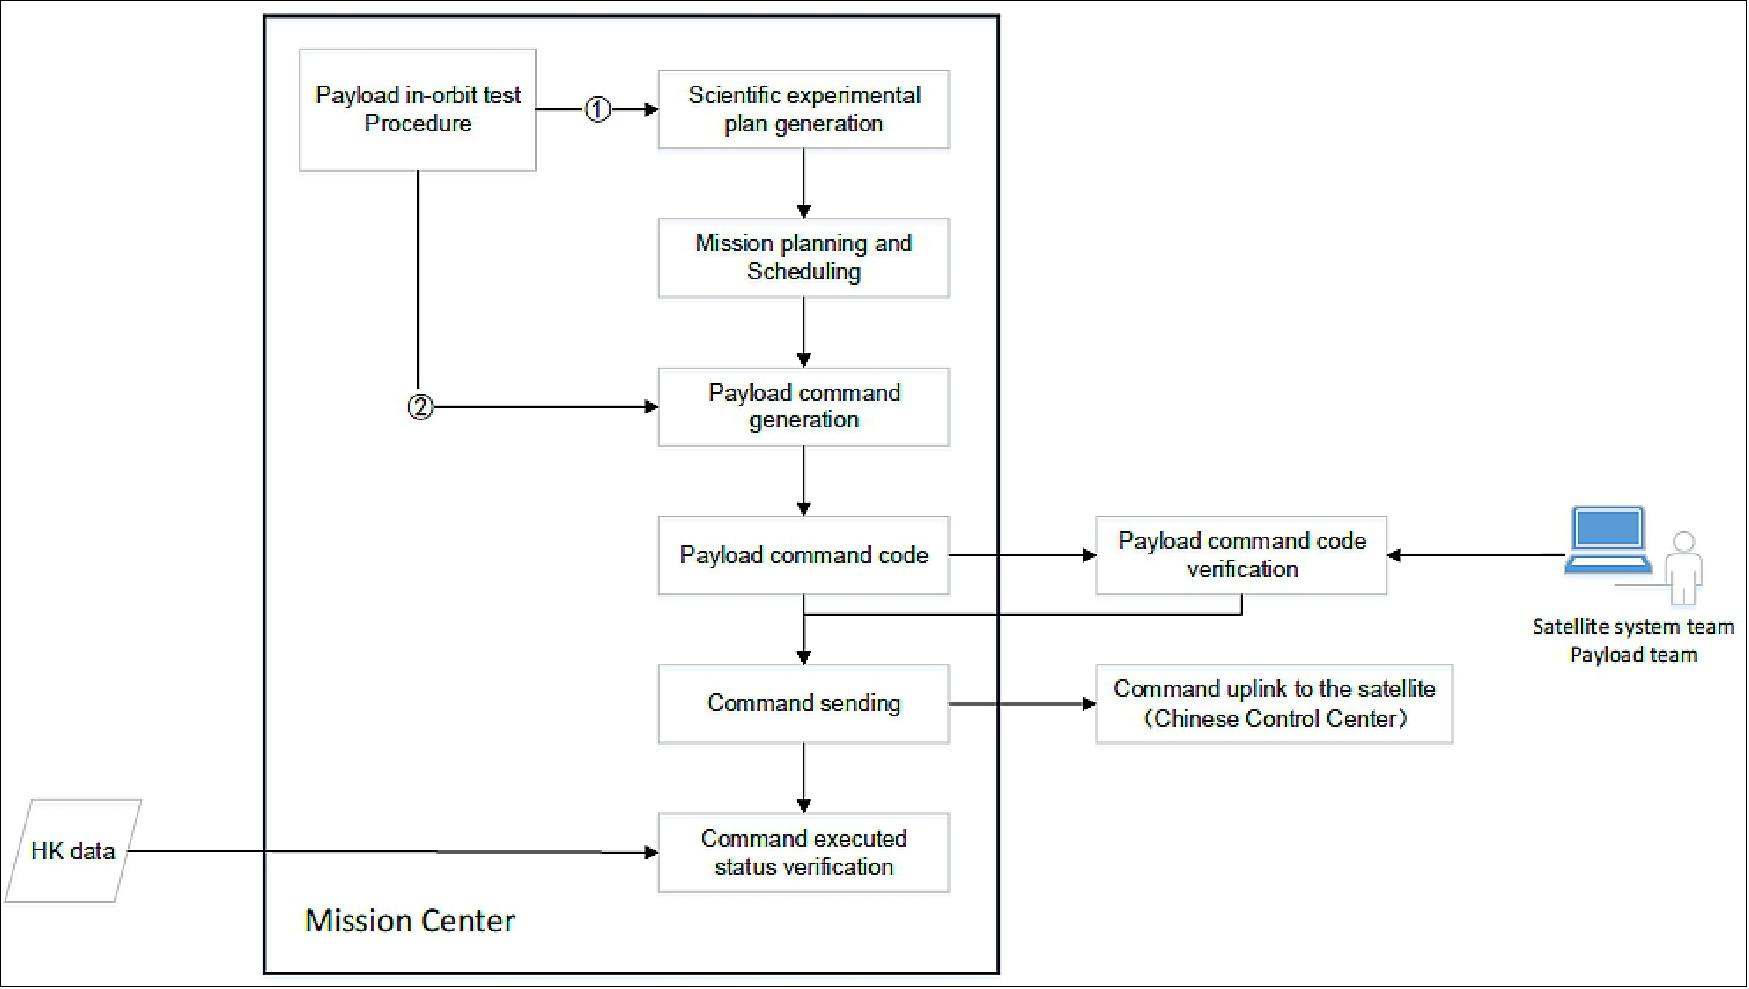 Figure 17: Payload control process function (image credit: NSSC, CAS)